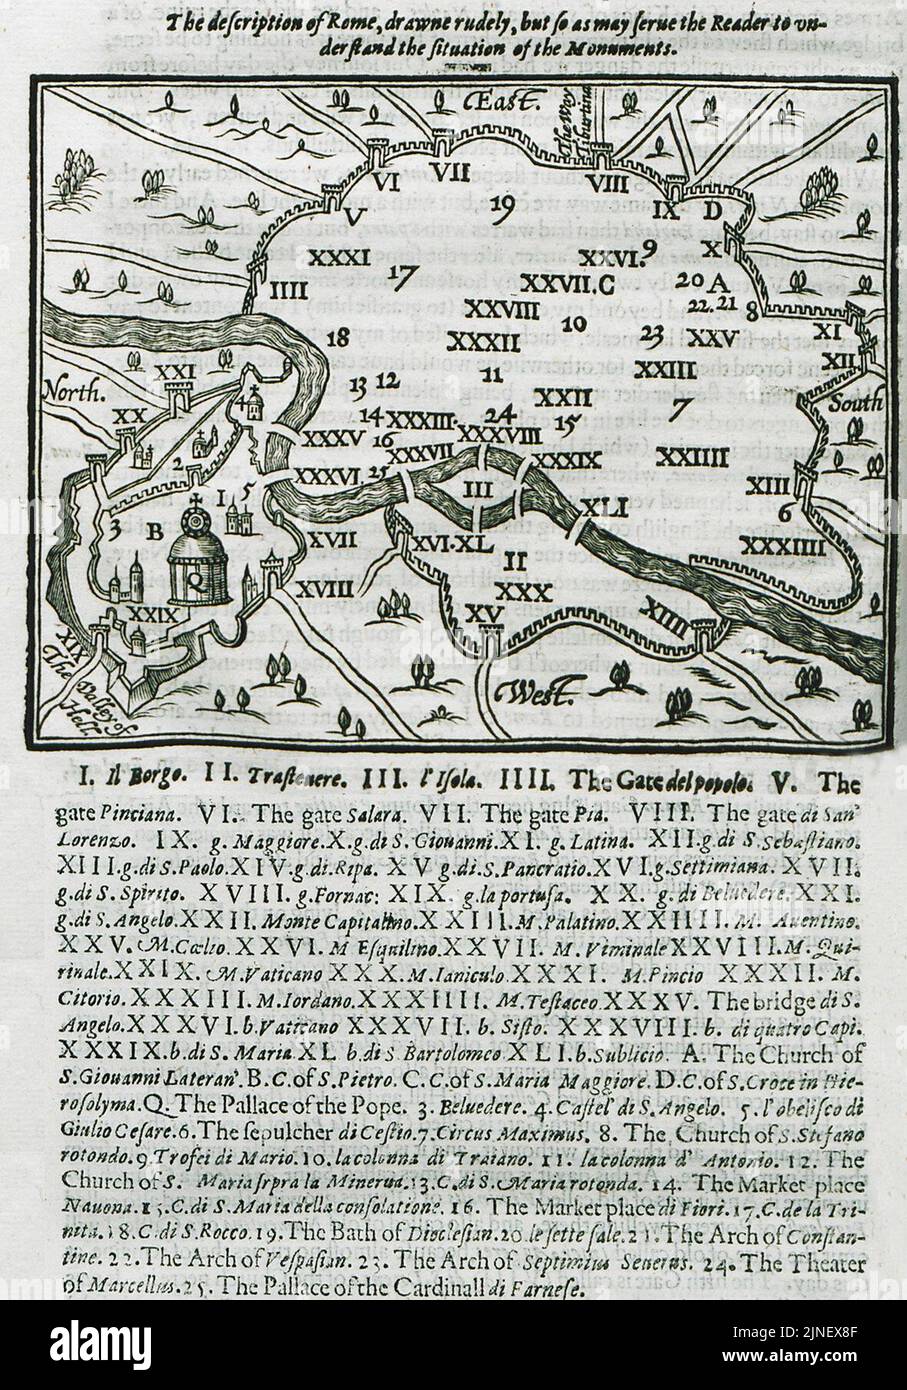 The description of Rome, drawne rudely, but so as may serve the reader to understand the situation of the monuments - Moryson Fynes - 1617 Stock Photo